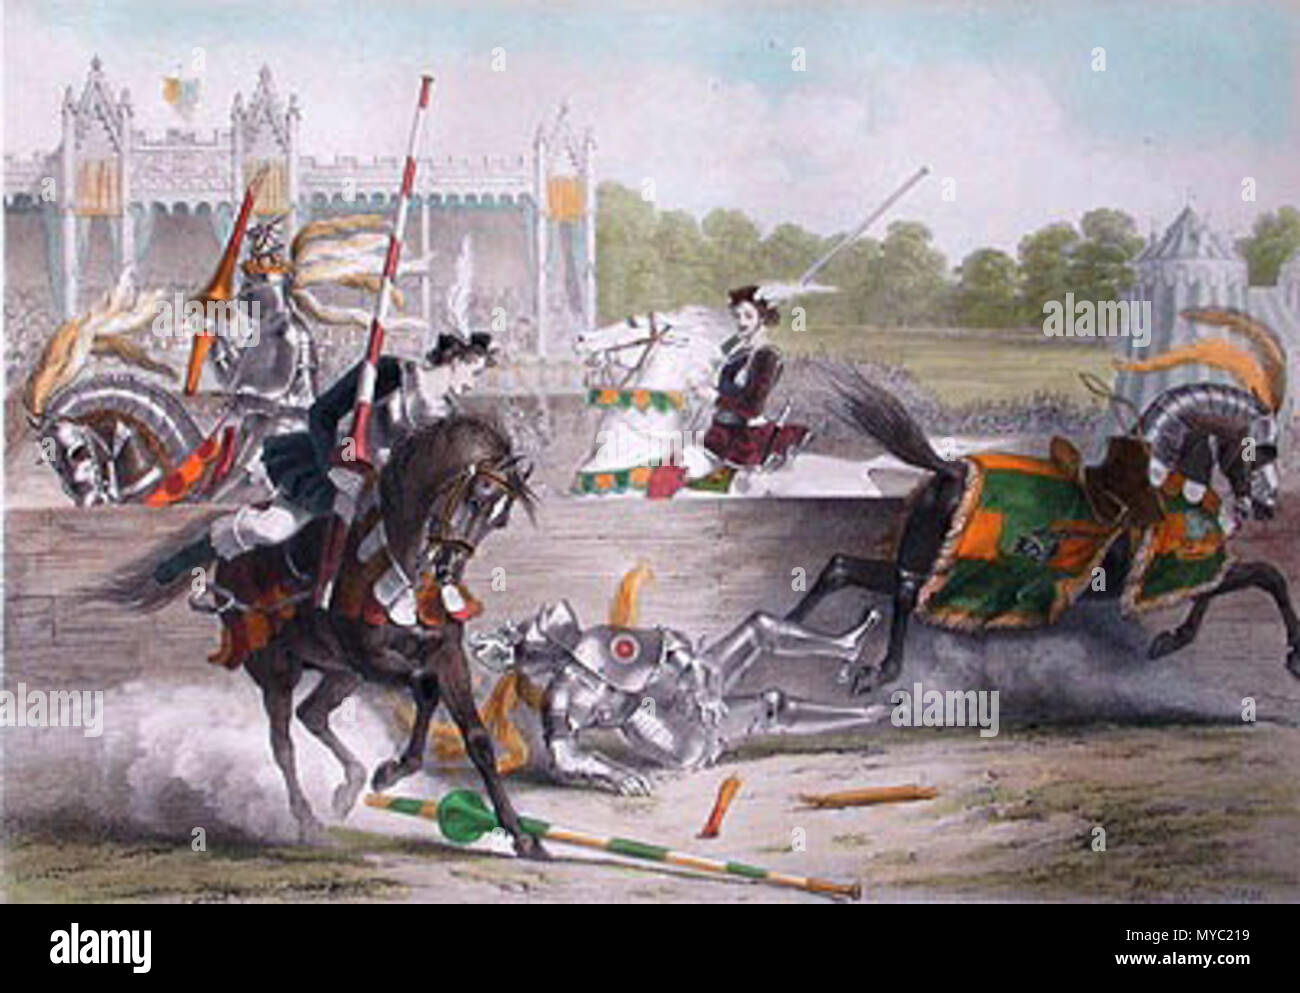 . The Joust Between The Lord of The Tournament and The Knight of The Red Rose, Eglinton tournament . 1839. corbould edward henry 123 Corbould edward henry thejoustbetweenthelordofthetournament Stock Photo